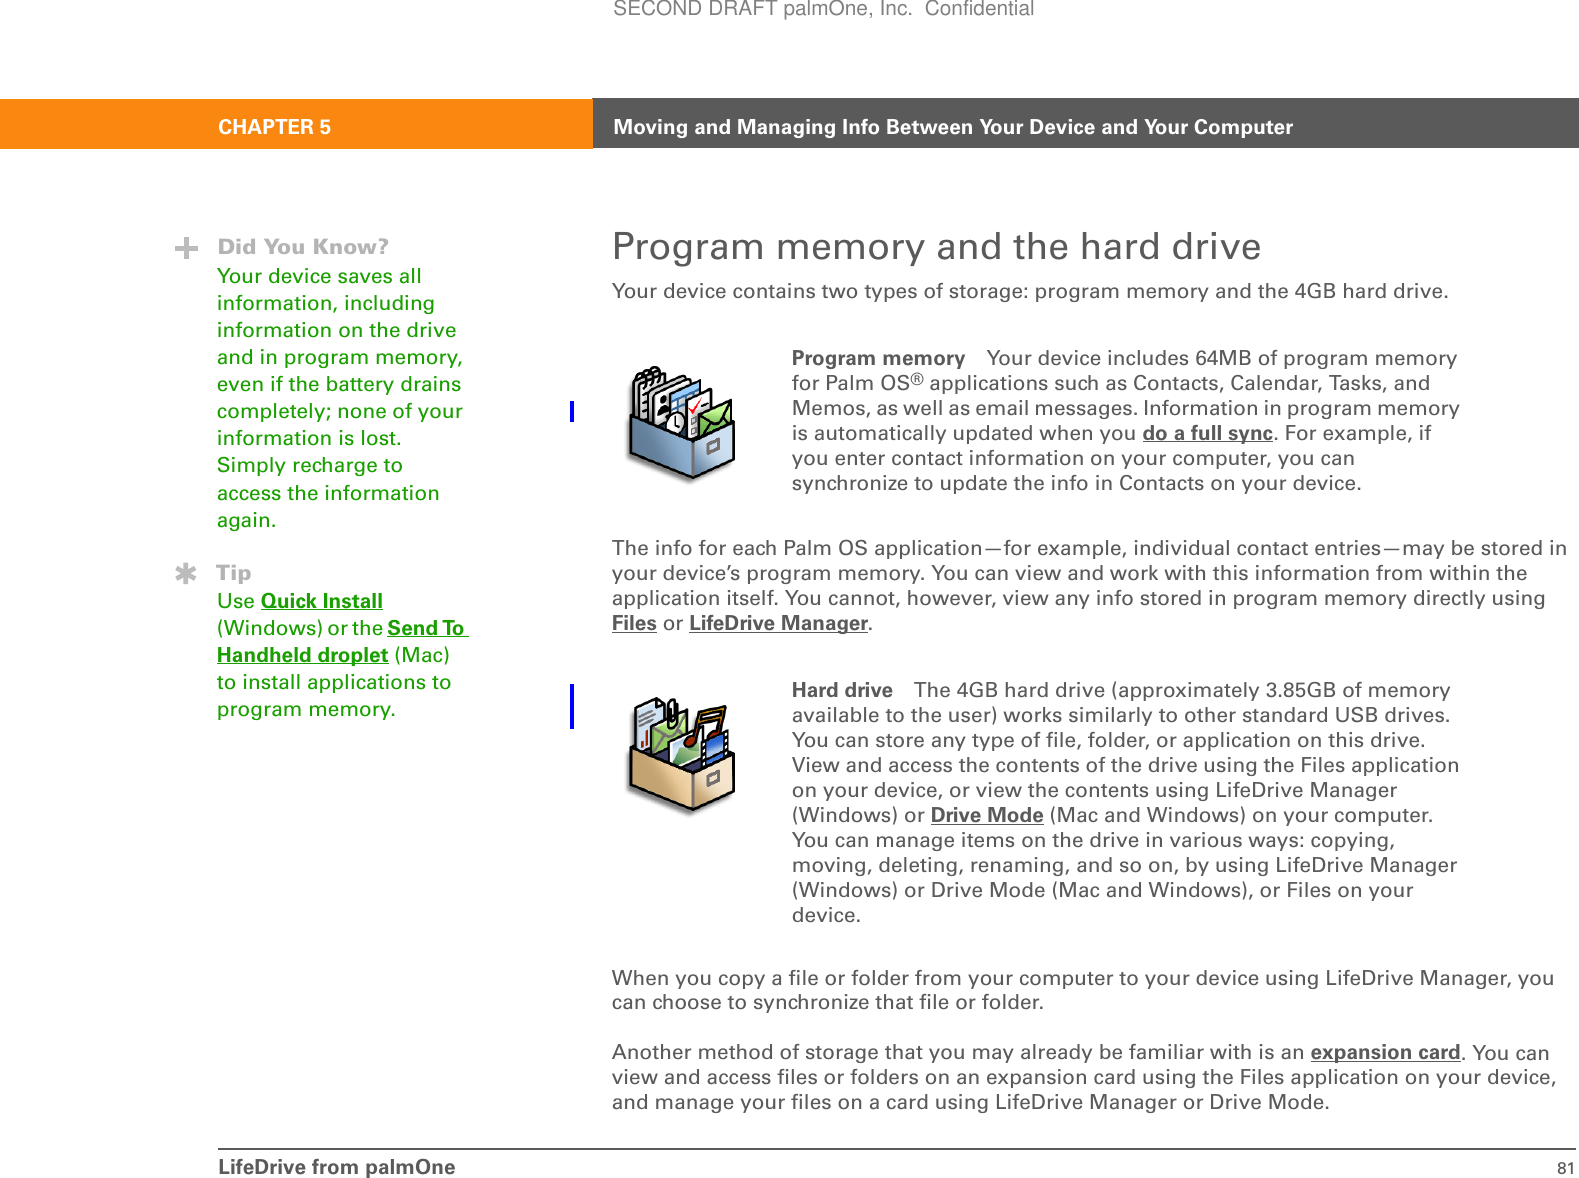 LifeDrive from palmOne 81CHAPTER 5 Moving and Managing Info Between Your Device and Your ComputerProgram memory and the hard driveYour device contains two types of storage: program memory and the 4GB hard drive.0The info for each Palm OS application—for example, individual contact entries—may be stored in your device’s program memory. You can view and work with this information from within the application itself. You cannot, however, view any info stored in program memory directly using Files or LifeDrive Manager.0When you copy a file or folder from your computer to your device using LifeDrive Manager, you can choose to synchronize that file or folder.Another method of storage that you may already be familiar with is an expansion card. You can view and access files or folders on an expansion card using the Files application on your device, and manage your files on a card using LifeDrive Manager or Drive Mode.Program memory Your device includes 64MB of program memory for Palm OS® applications such as Contacts, Calendar, Tasks, and Memos, as well as email messages. Information in program memory is automatically updated when you do a full sync. For example, if you enter contact information on your computer, you can synchronize to update the info in Contacts on your device.Hard drive The 4GB hard drive (approximately 3.85GB of memory available to the user) works similarly to other standard USB drives. You can store any type of file, folder, or application on this drive. View and access the contents of the drive using the Files application on your device, or view the contents using LifeDrive Manager (Windows) or Drive Mode (Mac and Windows) on your computer. You can manage items on the drive in various ways: copying, moving, deleting, renaming, and so on, by using LifeDrive Manager (Windows) or Drive Mode (Mac and Windows), or Files on your device.Did You Know?Your device saves all information, including information on the drive and in program memory, even if the battery drains completely; none of your information is lost. Simply recharge to access the information again.TipUse Quick Install (Windows) or the Send To Handheld droplet (Mac) to install applications to program memory.SECOND DRAFT palmOne, Inc.  Confidential